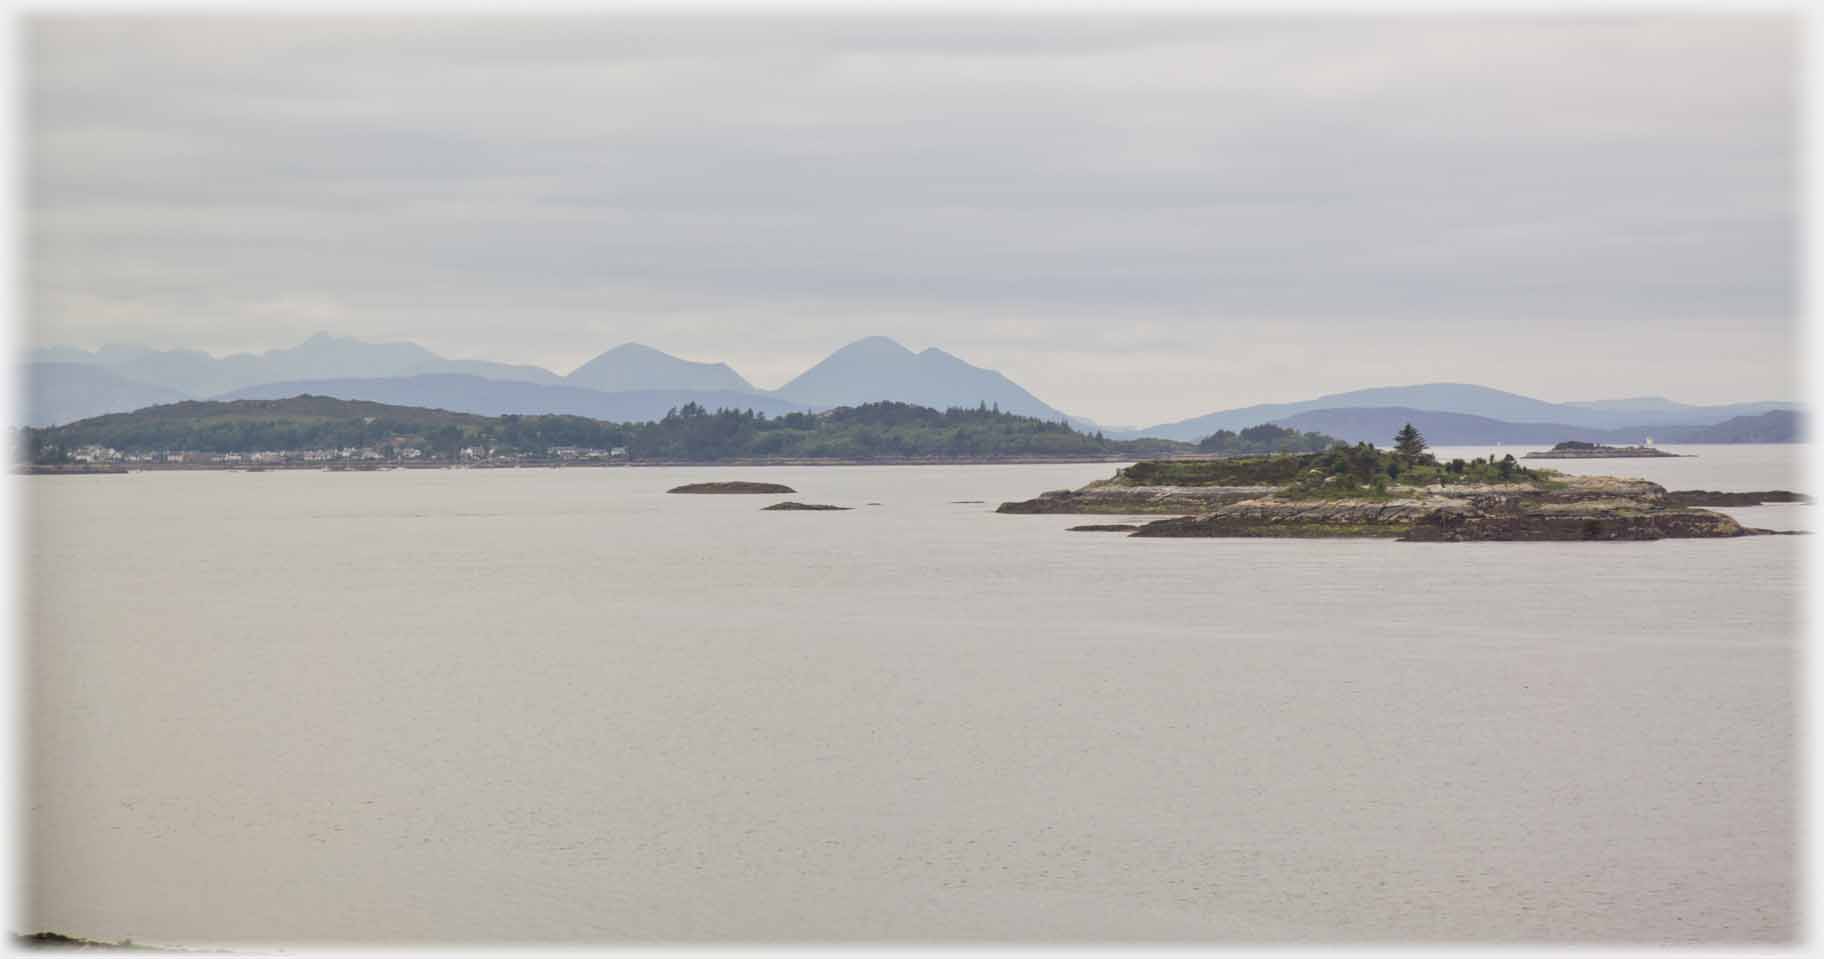 The Skye hills in the distance islets in the foreground.